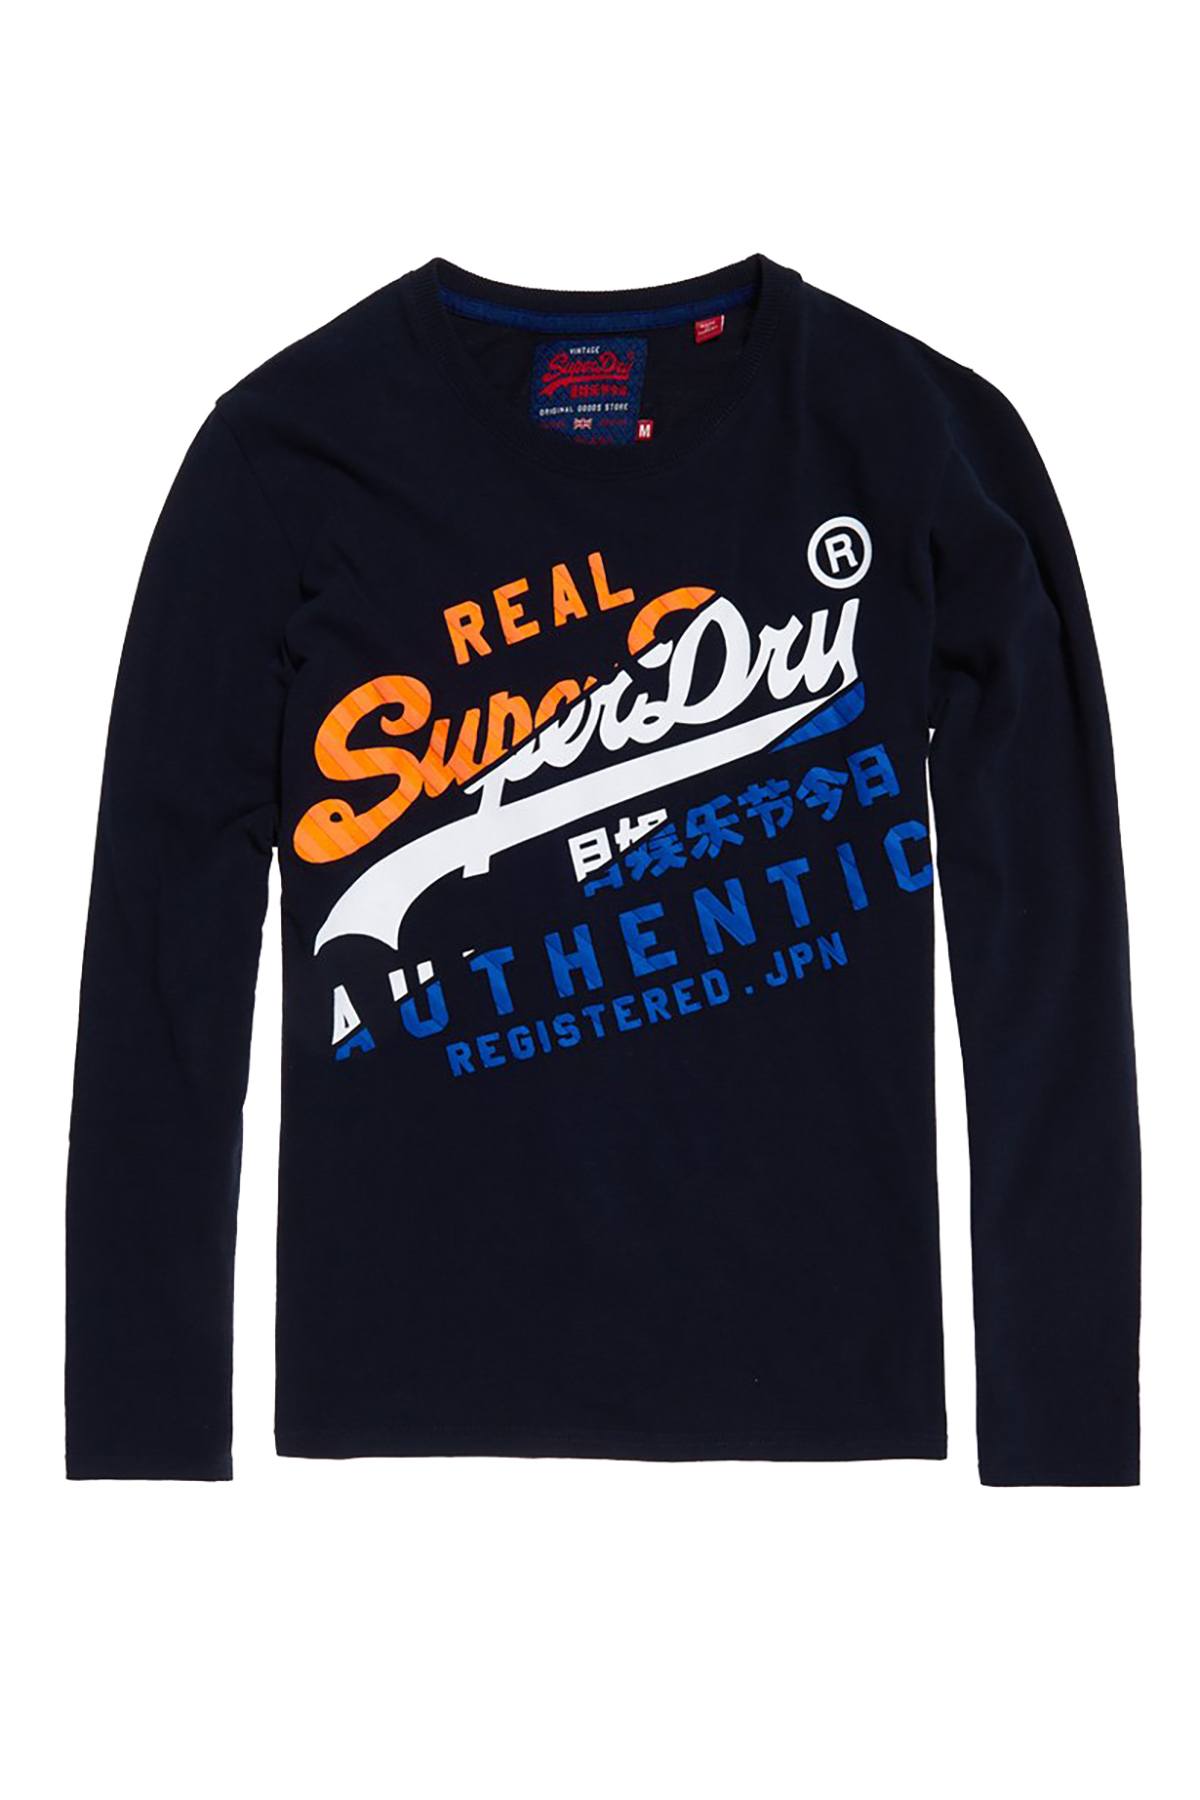 SuperDry Eclipse-Navy Vintage Authentic XL T-Shirt CheapUndies Long-Sleeve –